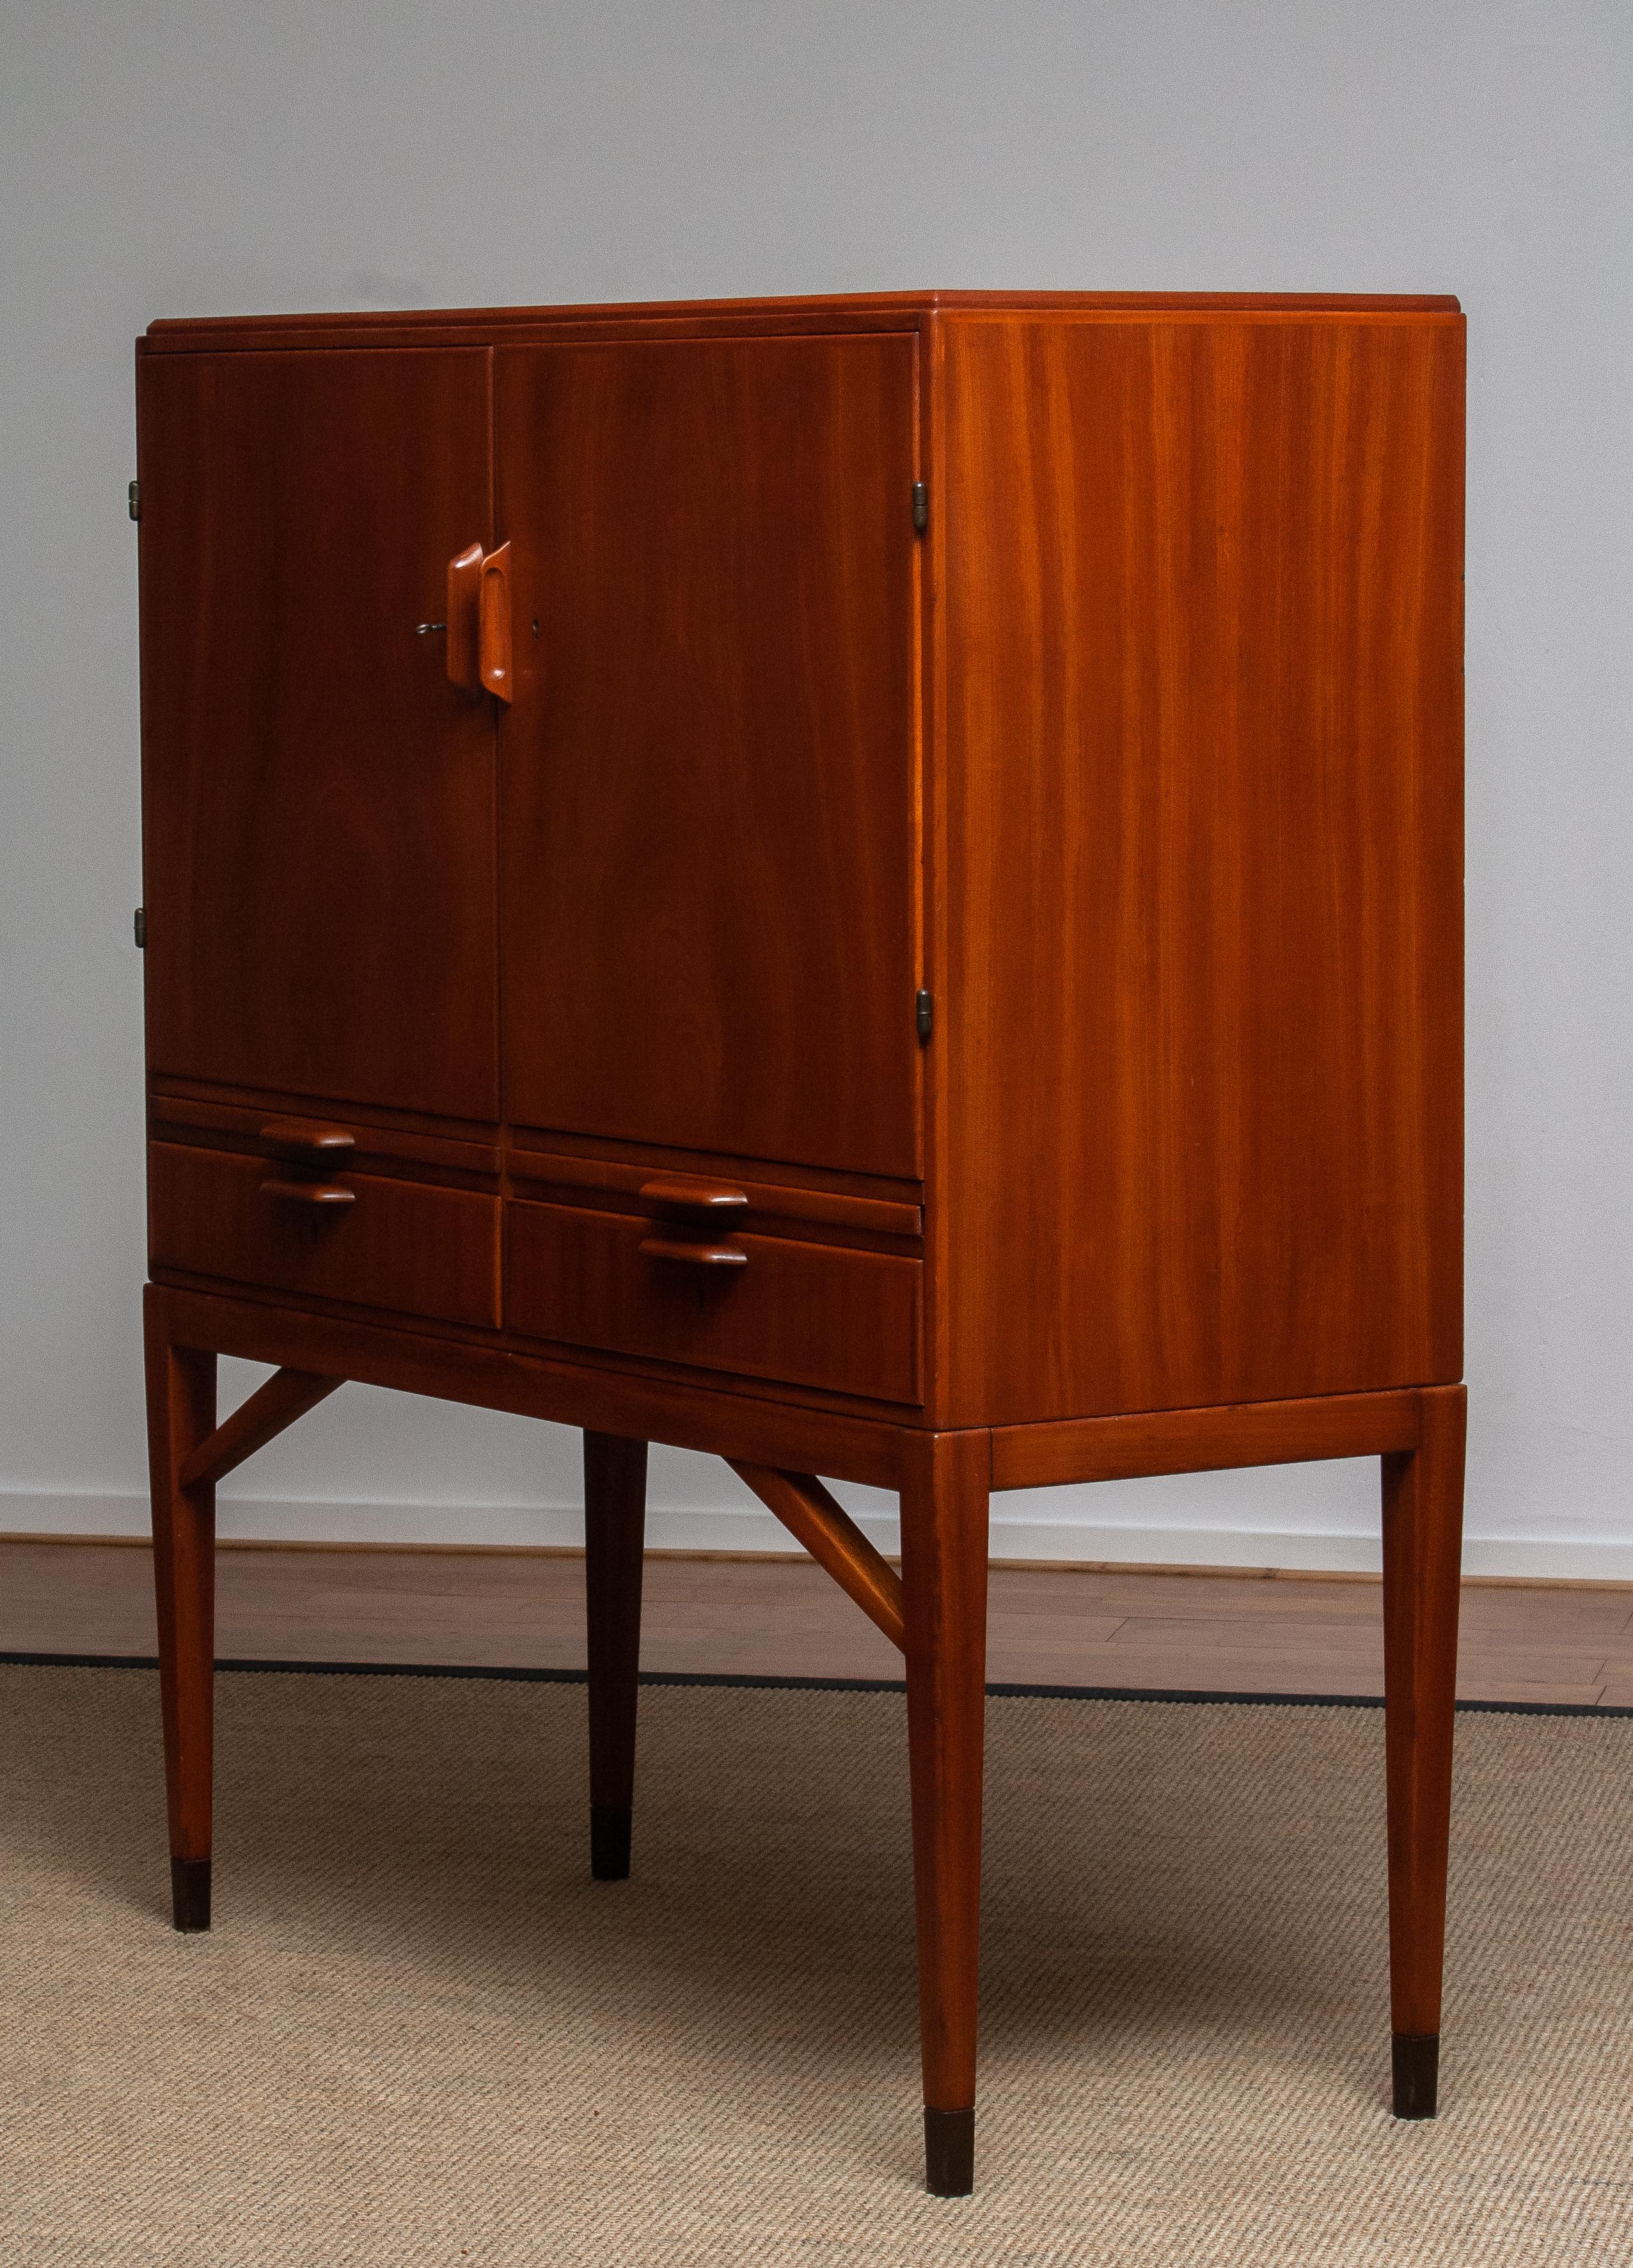 1950s, High Quality Mahogany Dry Bar / Cabinet Made by Marbo Sweden, SMI Labeled 12